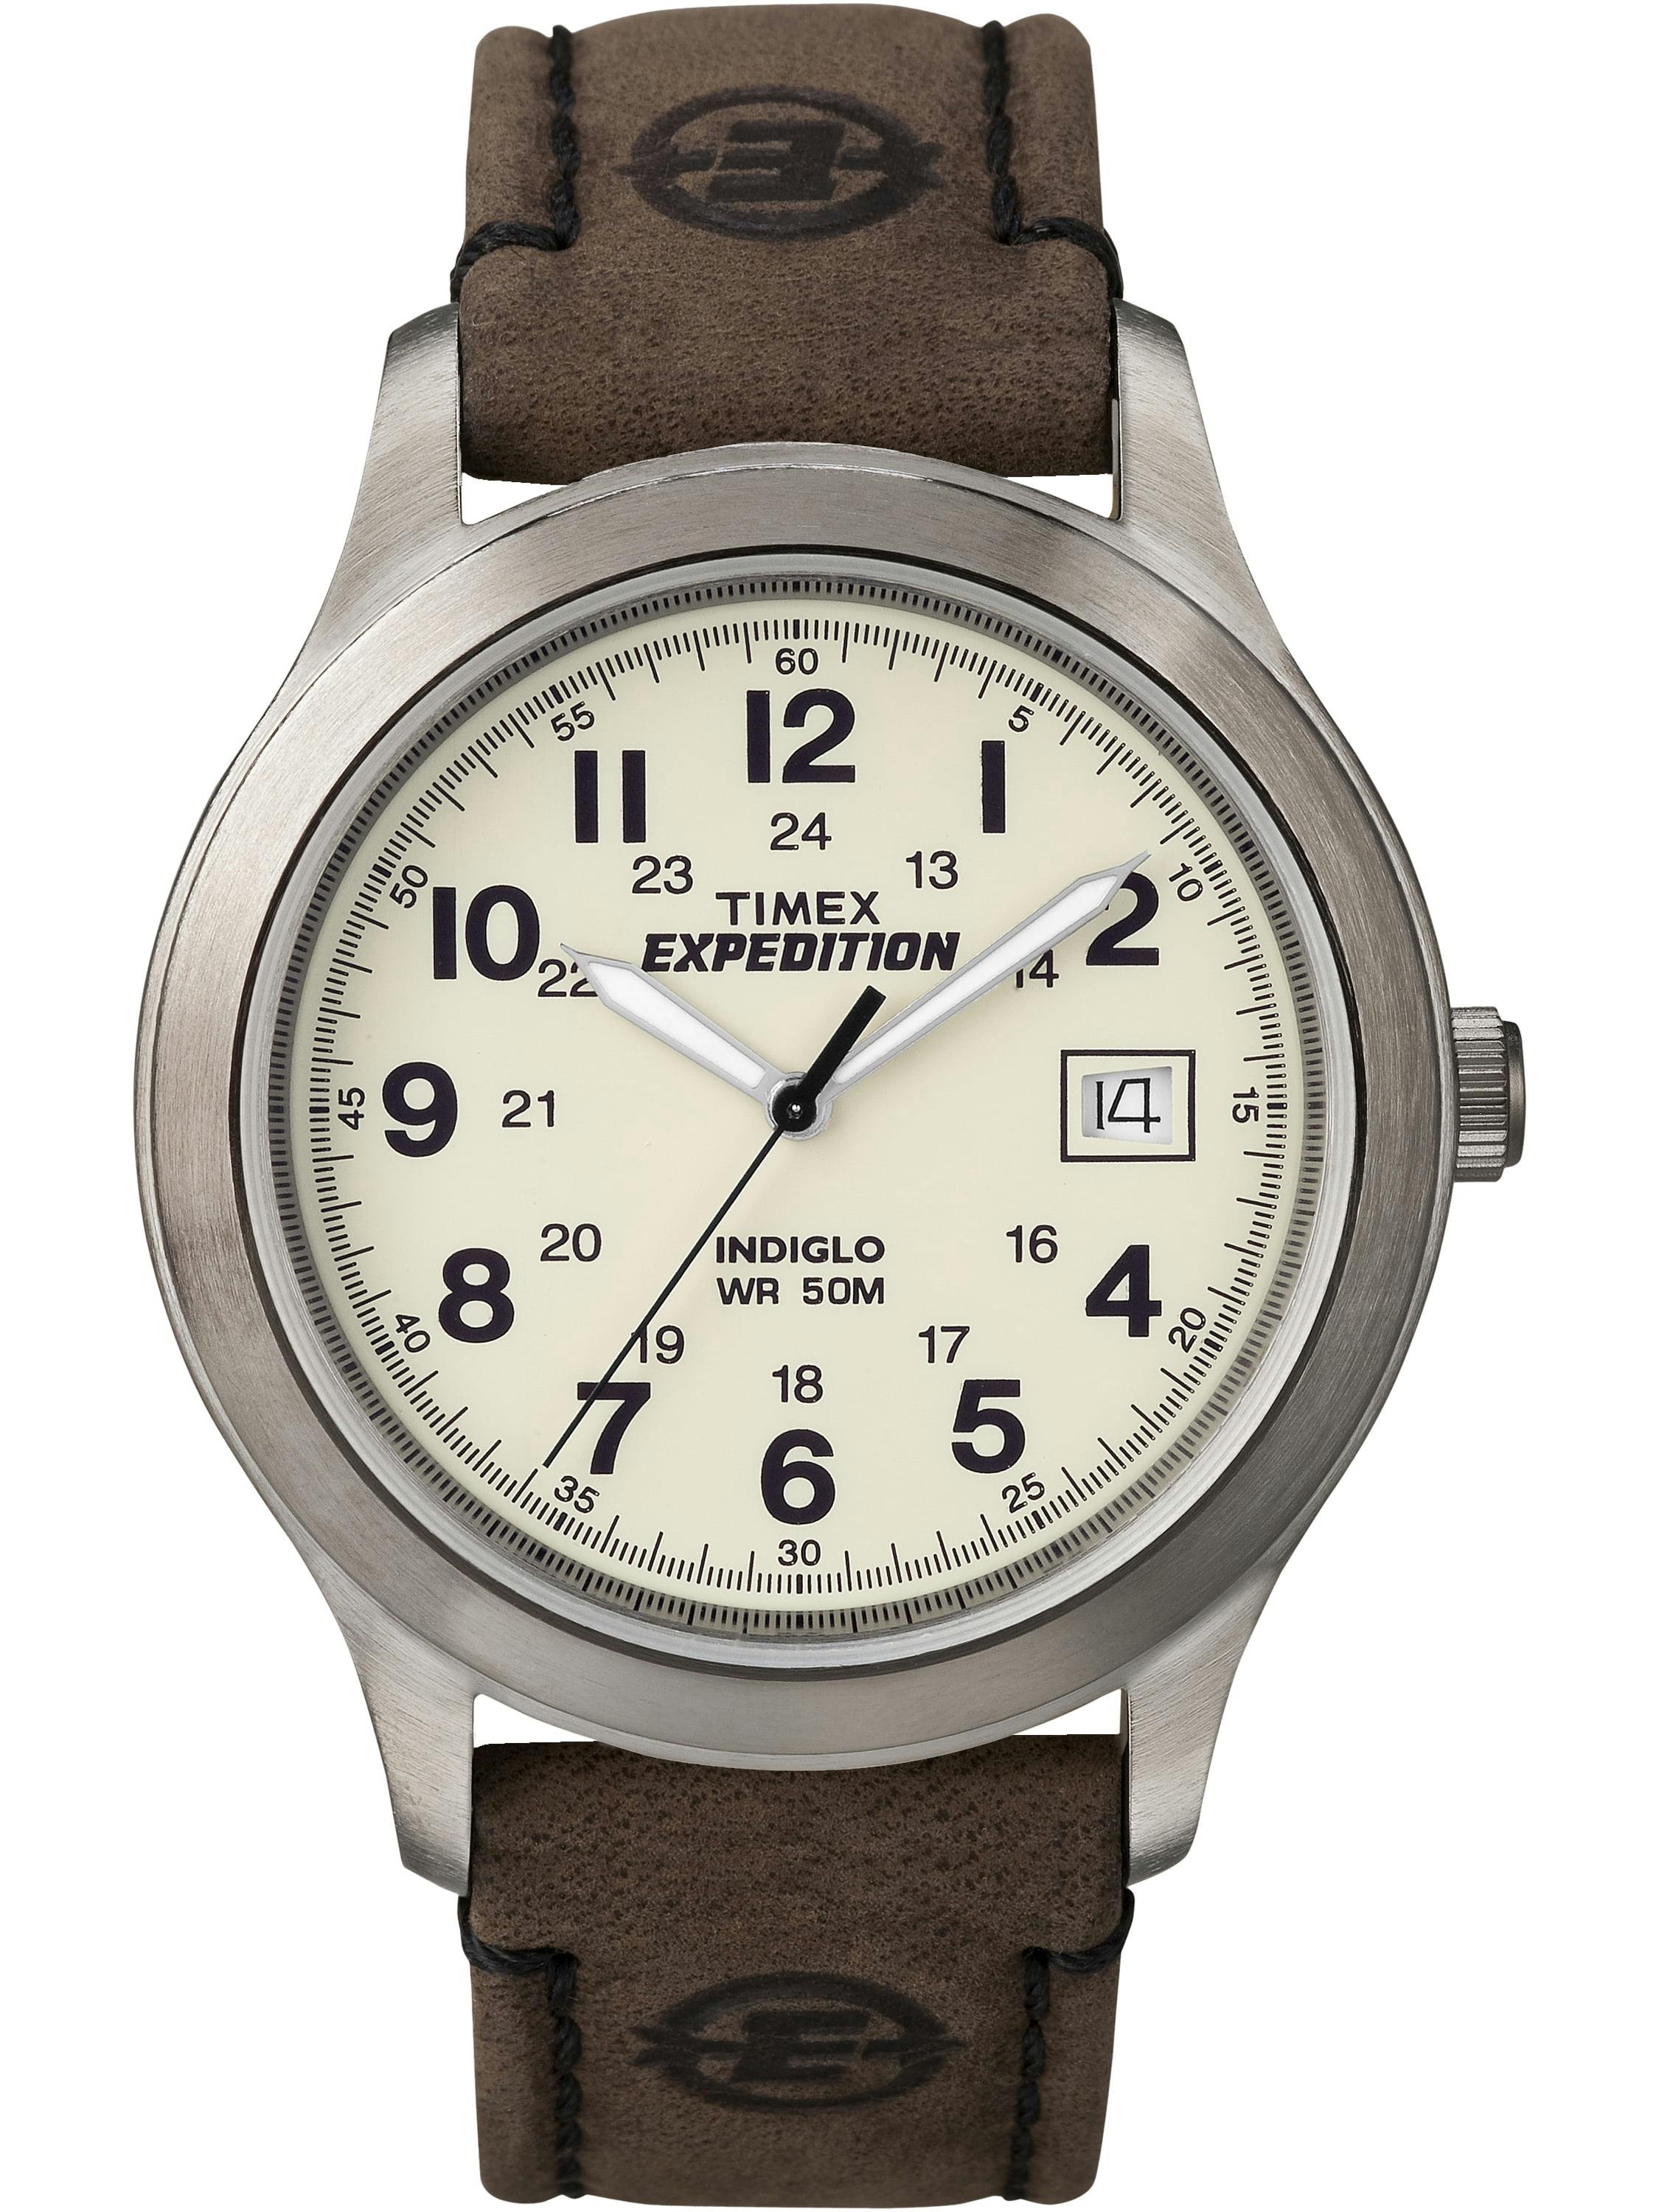 Expedition Quartz Analog Men's Watch with Brass Case and Leather Strap